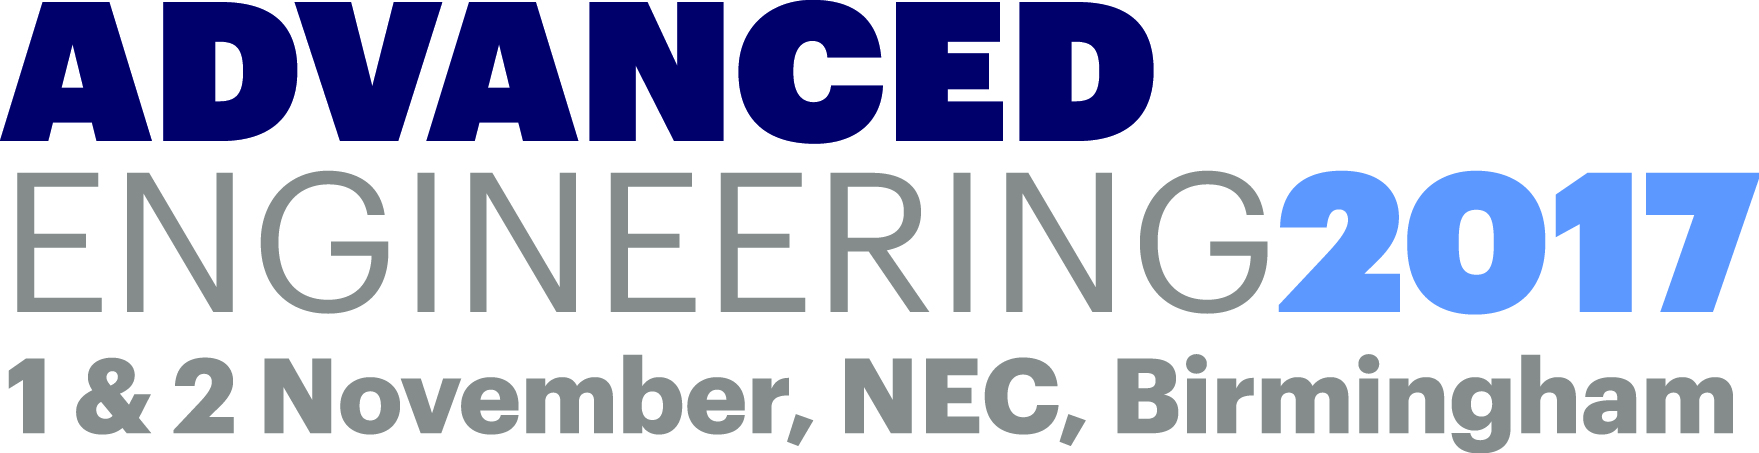 Present your expertise at Advanced Engineering 2017